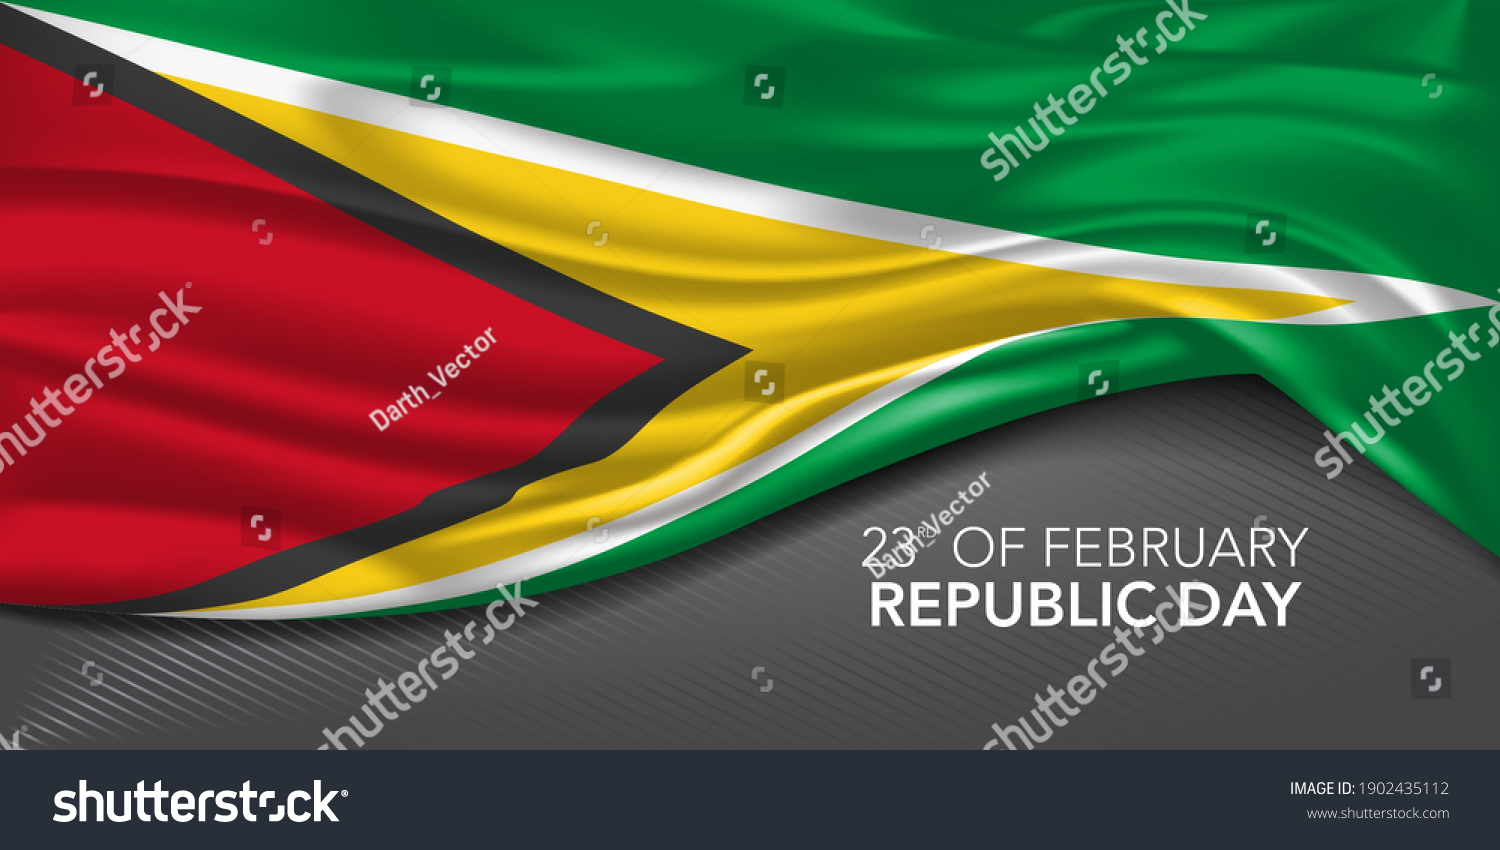 SVG of Guyana happy republic day greeting card, banner with template text vector illustration. Guyanese memorial holiday 23rd of February design element with 3D flag with green leaf svg